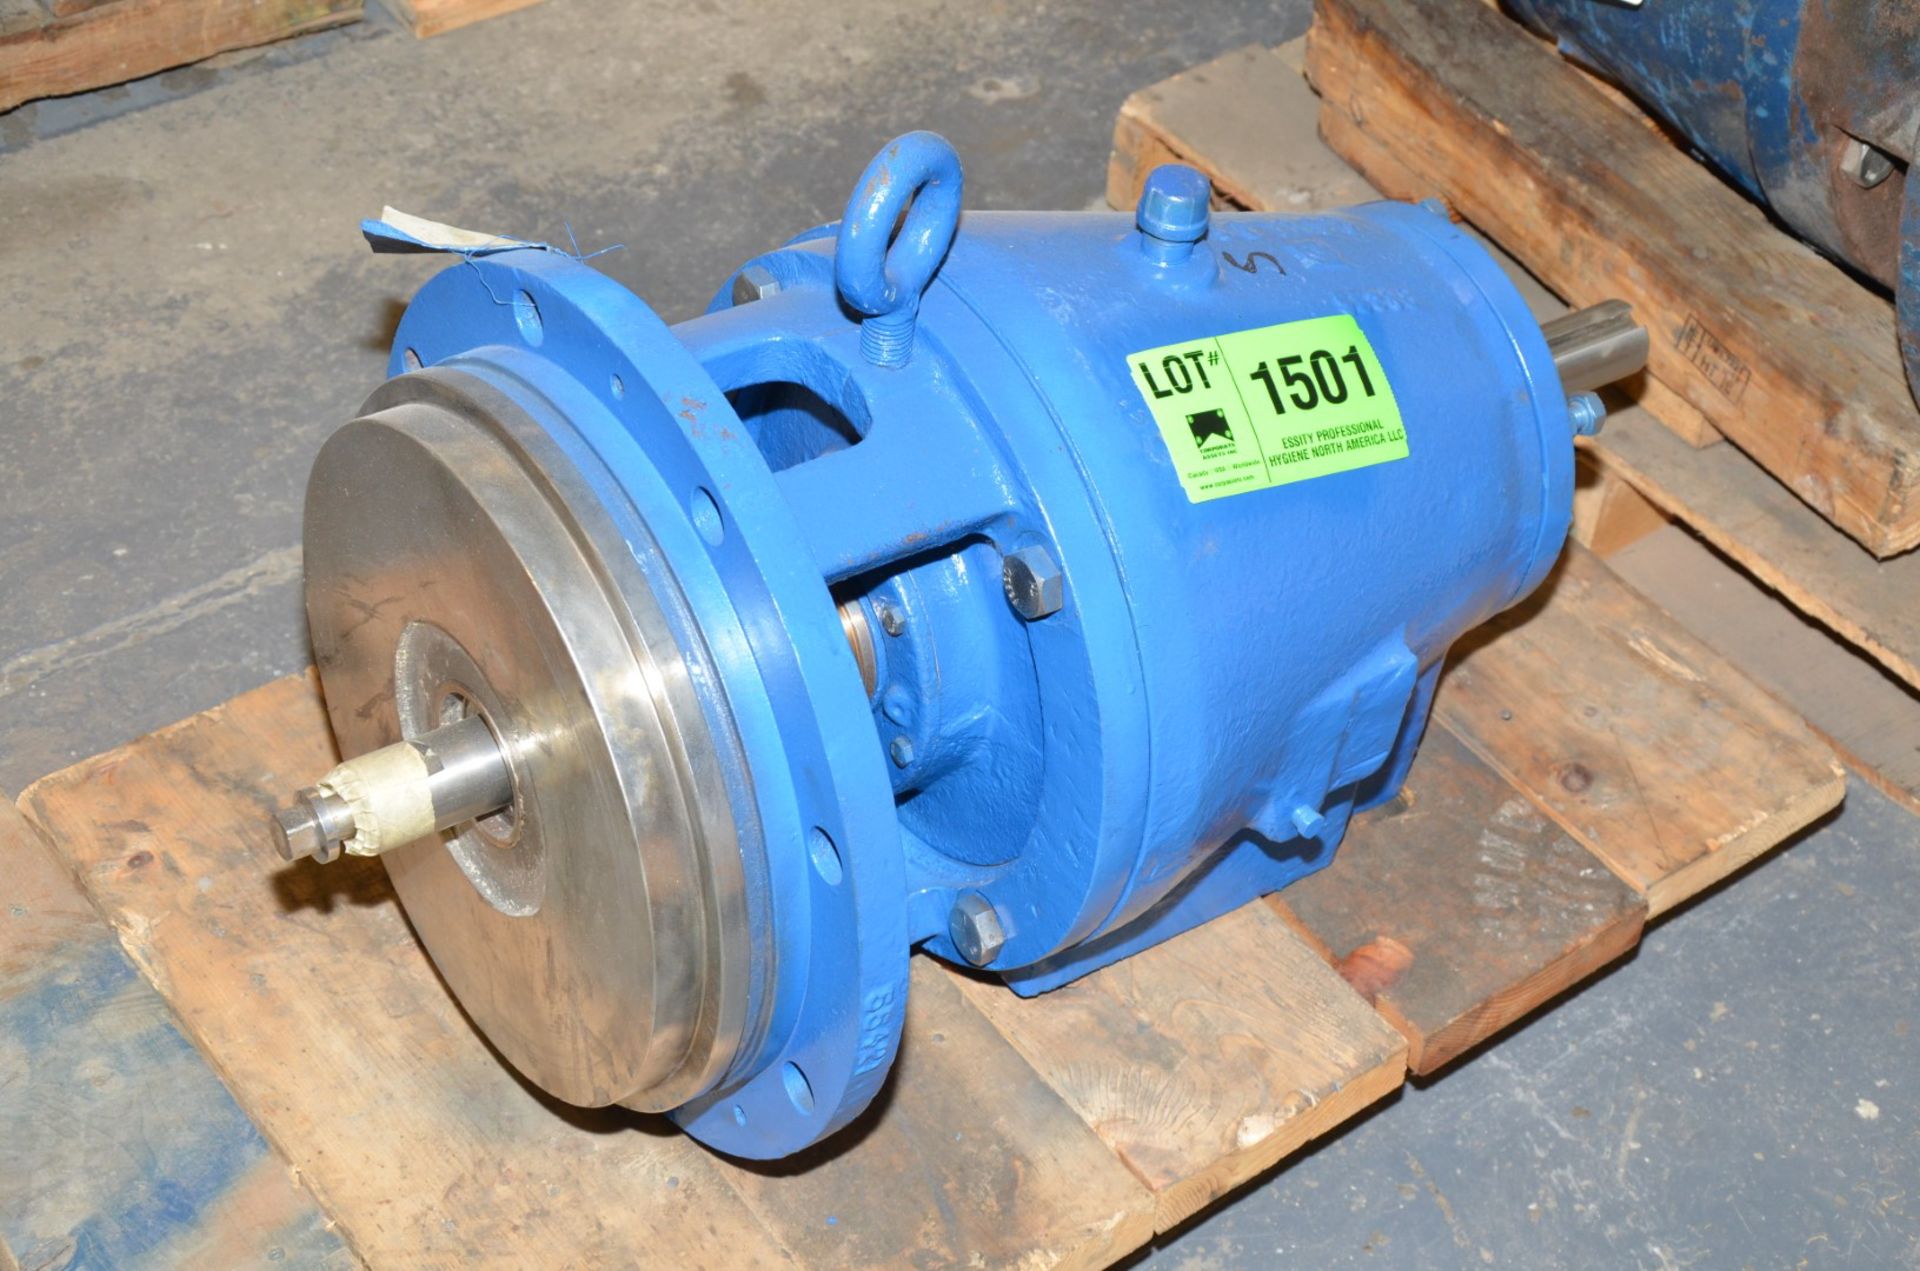 GOULDS 3175S 14" PUMP ROTARY ASSY [RIGGING FEE FOR LOT #1501 - $25 USD PLUS APPLICABLE TAXES]